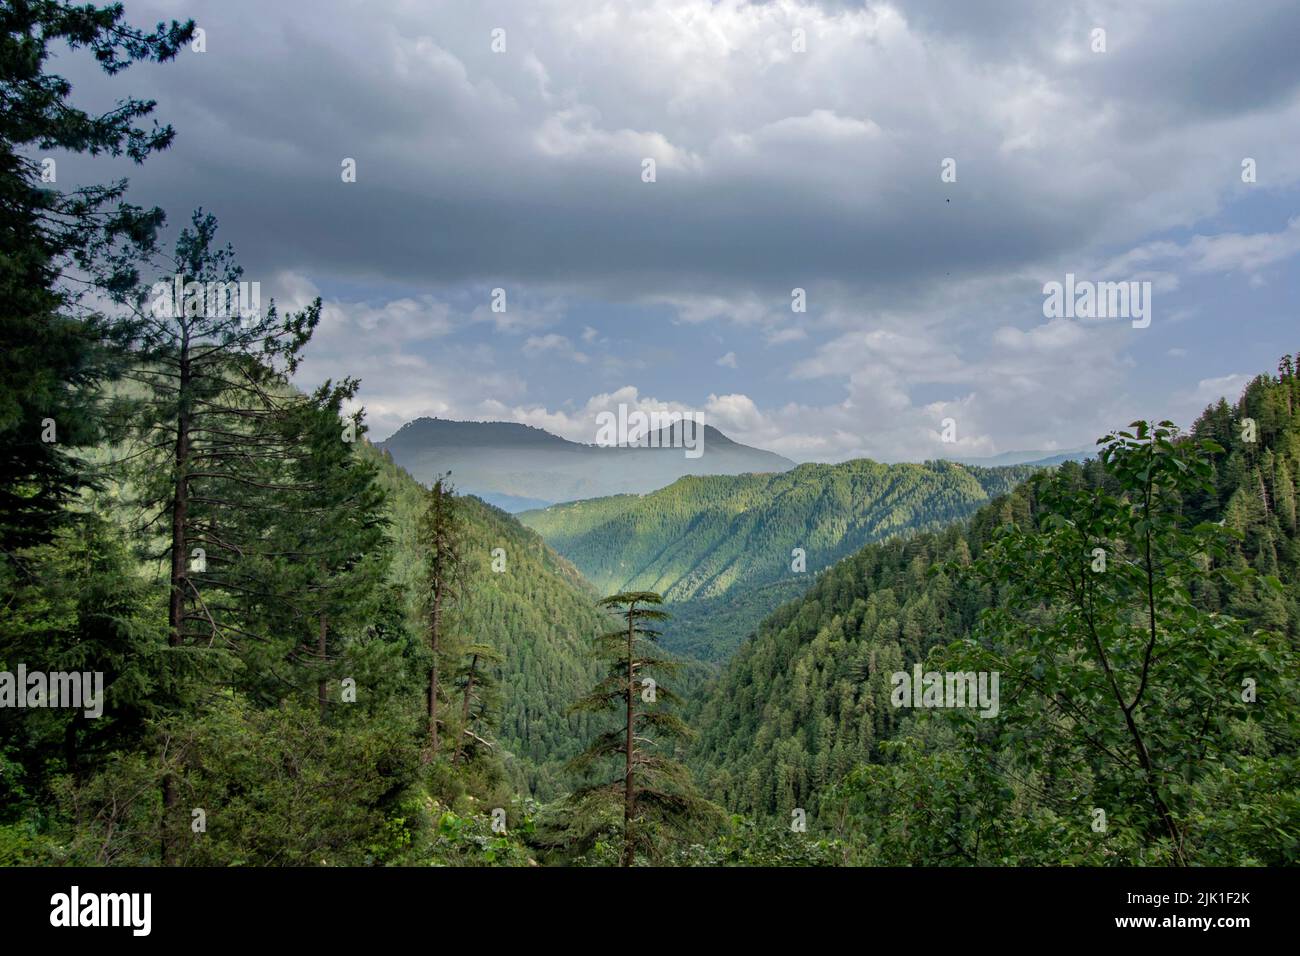 Lush green mountains valley view with dark clouds and sun rays. Stock Photo